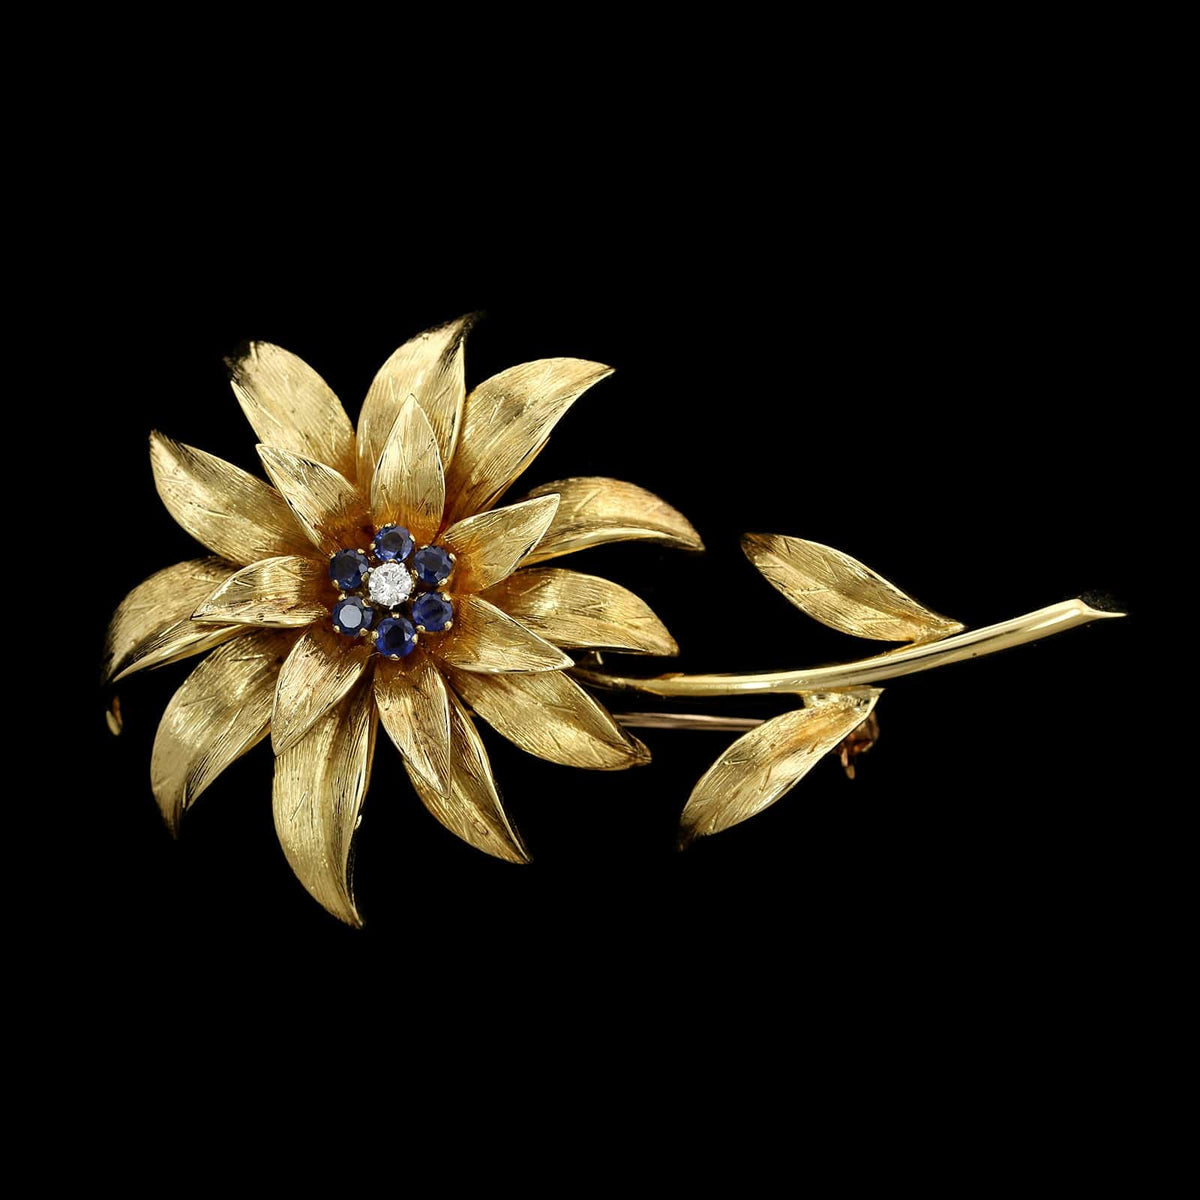 Tiffany & Co. Vintage Gold, Sapphire And Emerald Flower Brooch Available  For Immediate Sale At Sotheby's